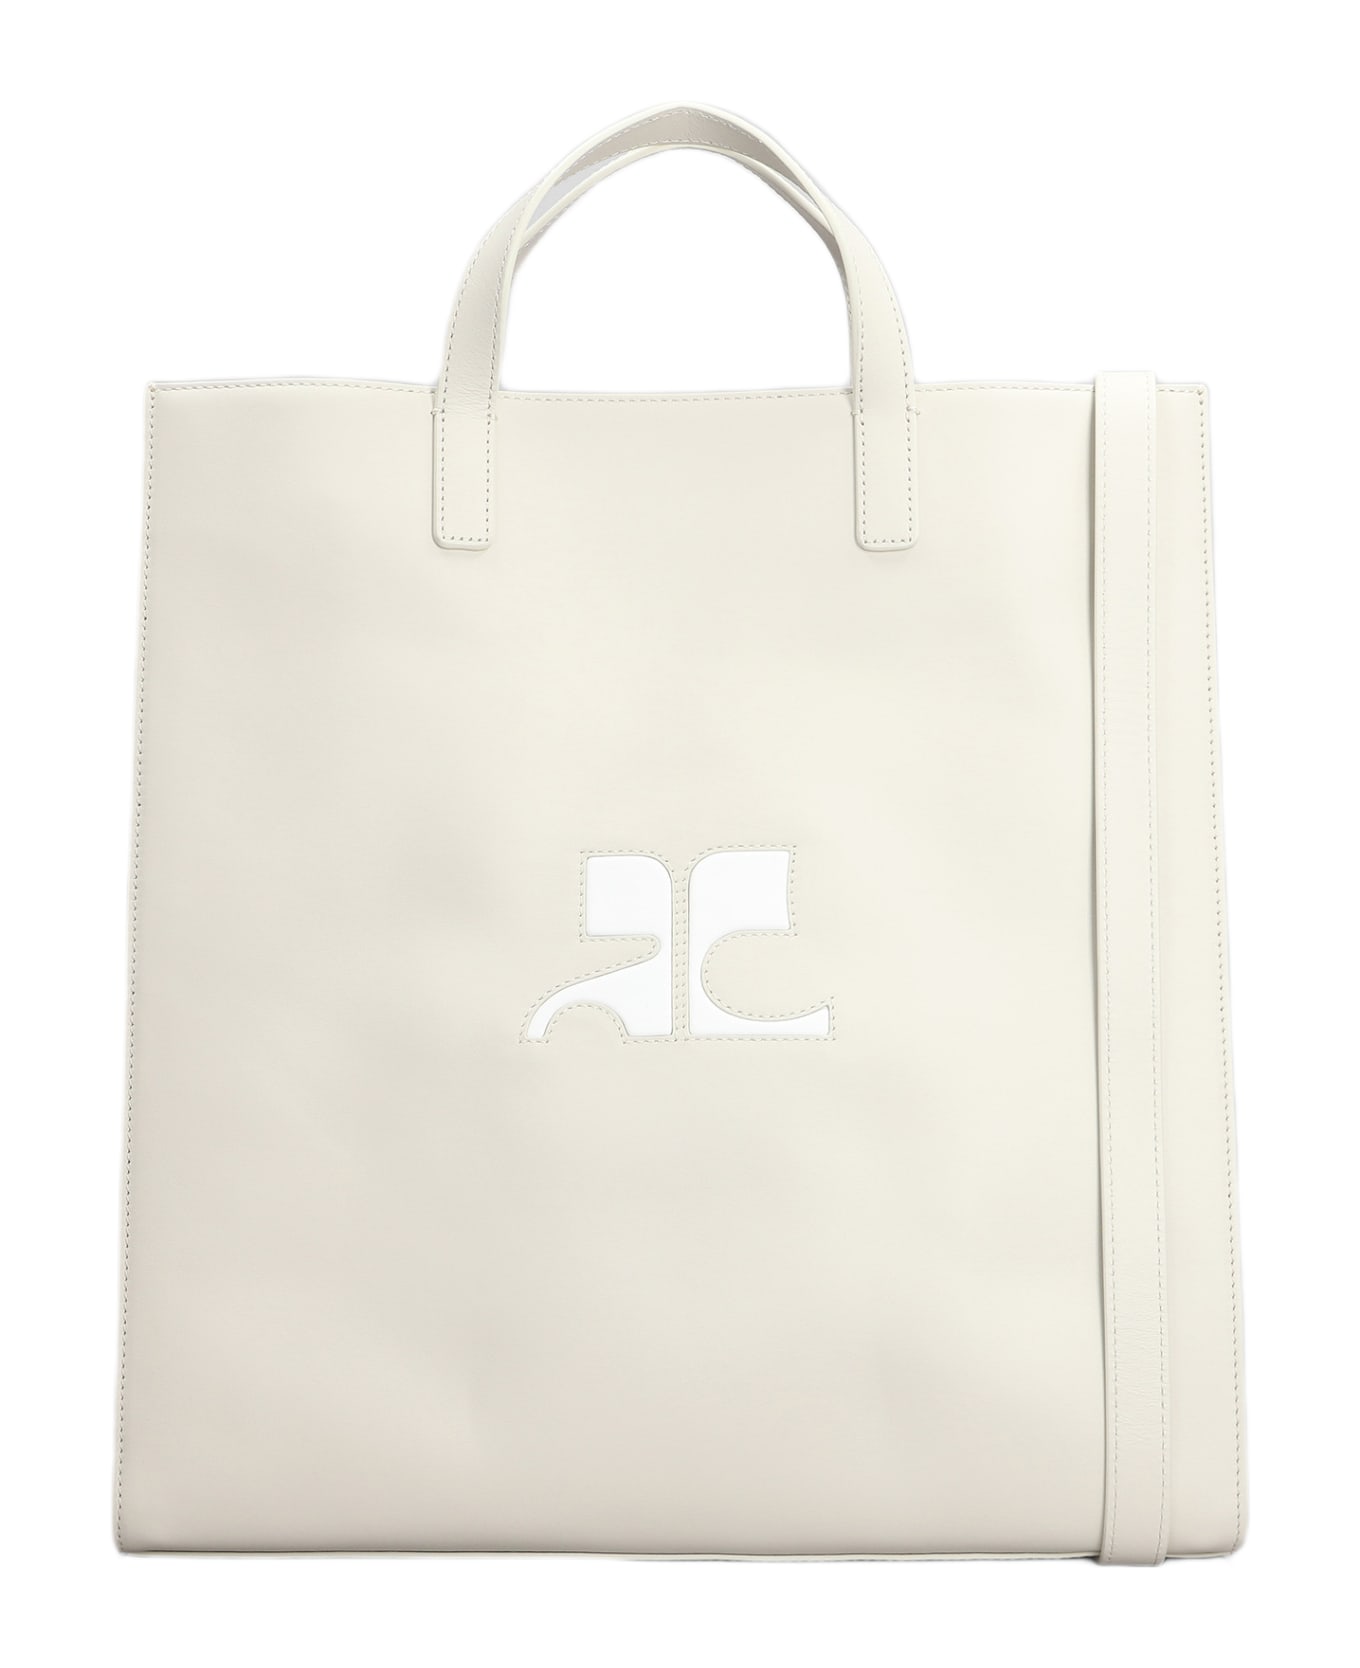 Courrèges Tote In Beige Leather - beige トートバッグ